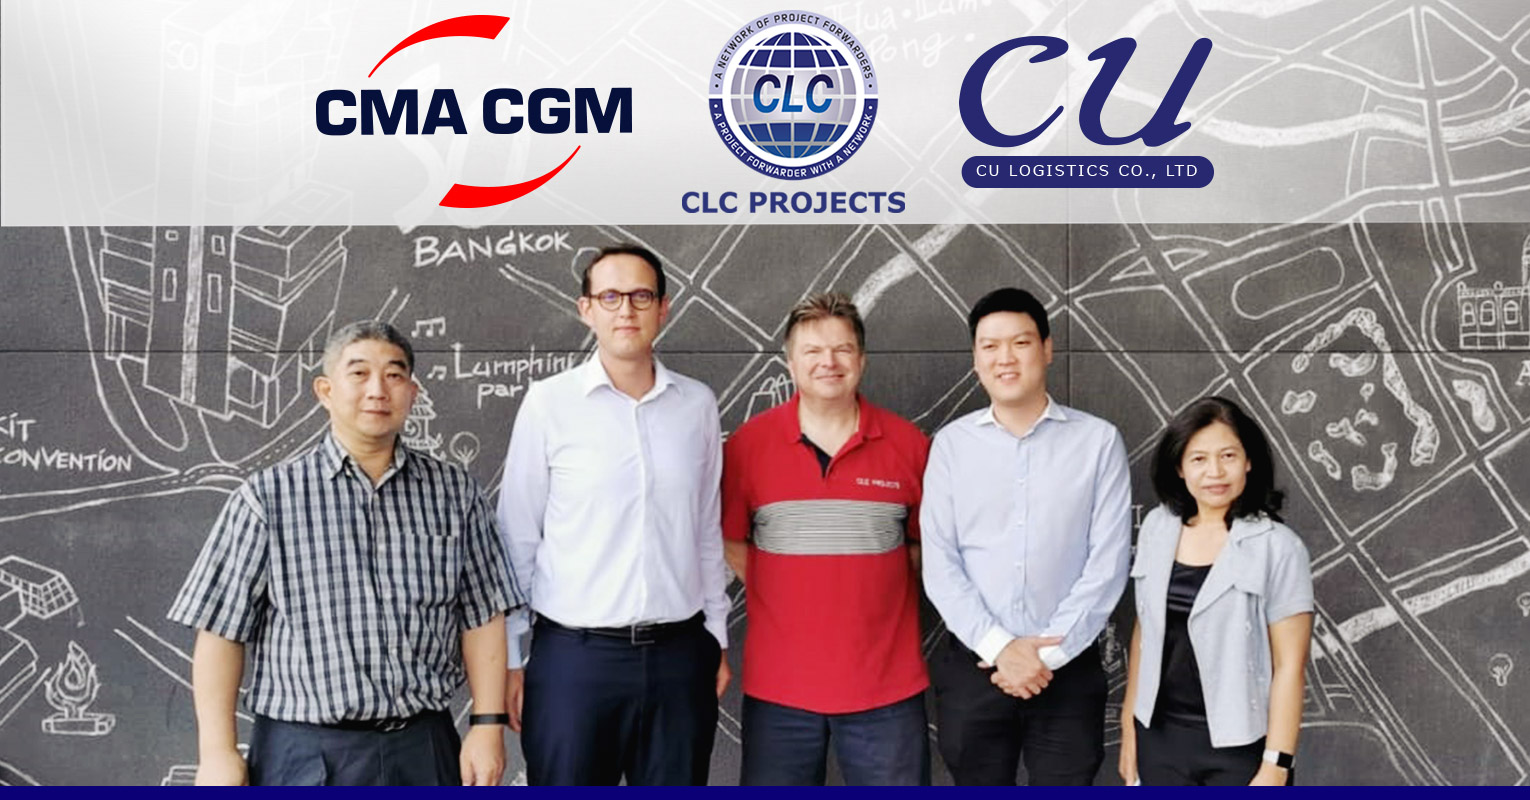 CLC Projects met with CMA CGM Thailand and CU Logistics in Bangkok